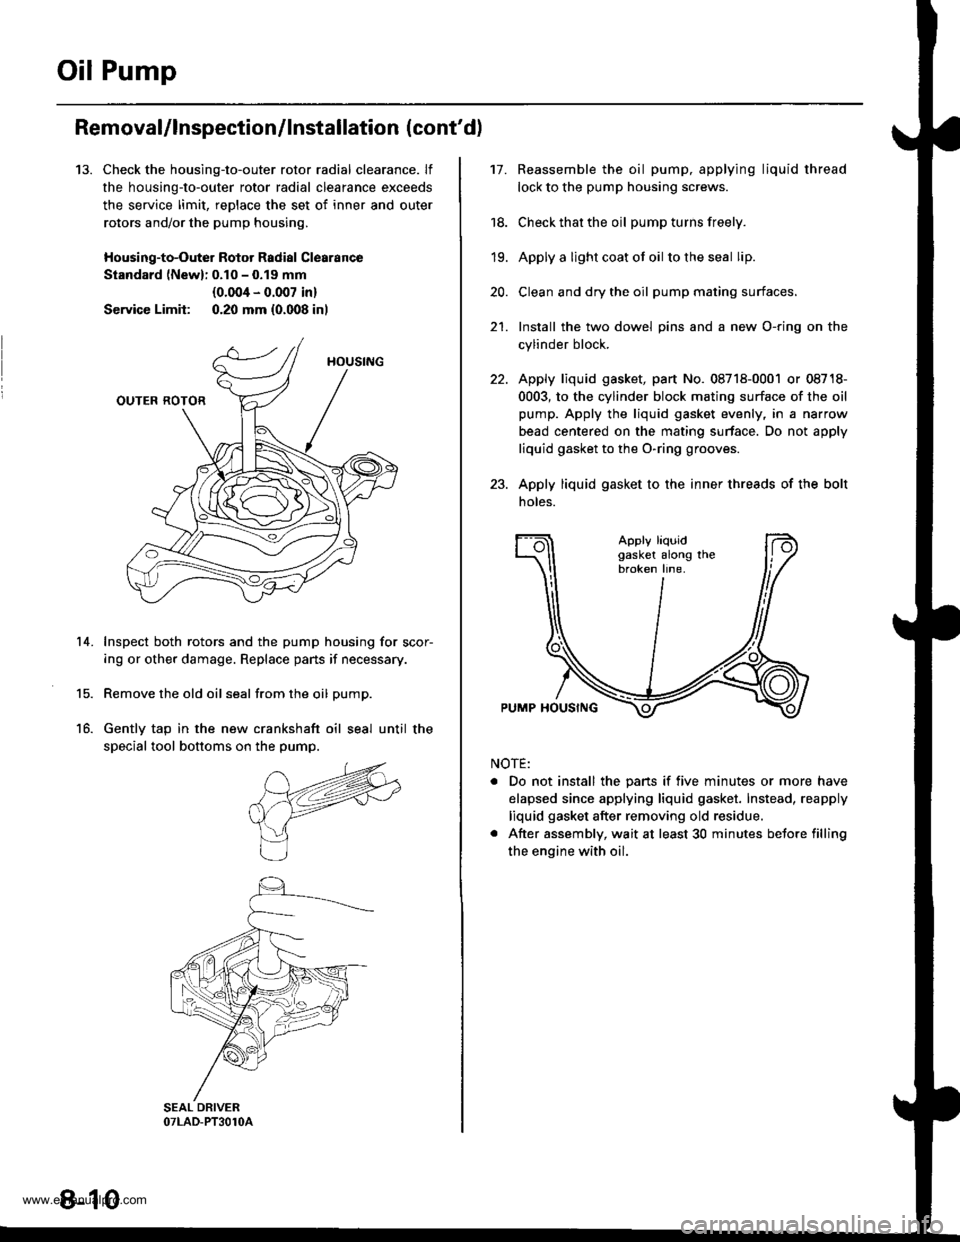 HONDA CR-V 2000 RD1-RD3 / 1.G Service Manual 
Oil Pump
13.
Removal/lnspection/lnstallation (contd)
Check the housing-to-outer rotor radial clearance. lf
the housing-to-outer rotor radial clearance exceeds
the service limit, reDlace the set of i